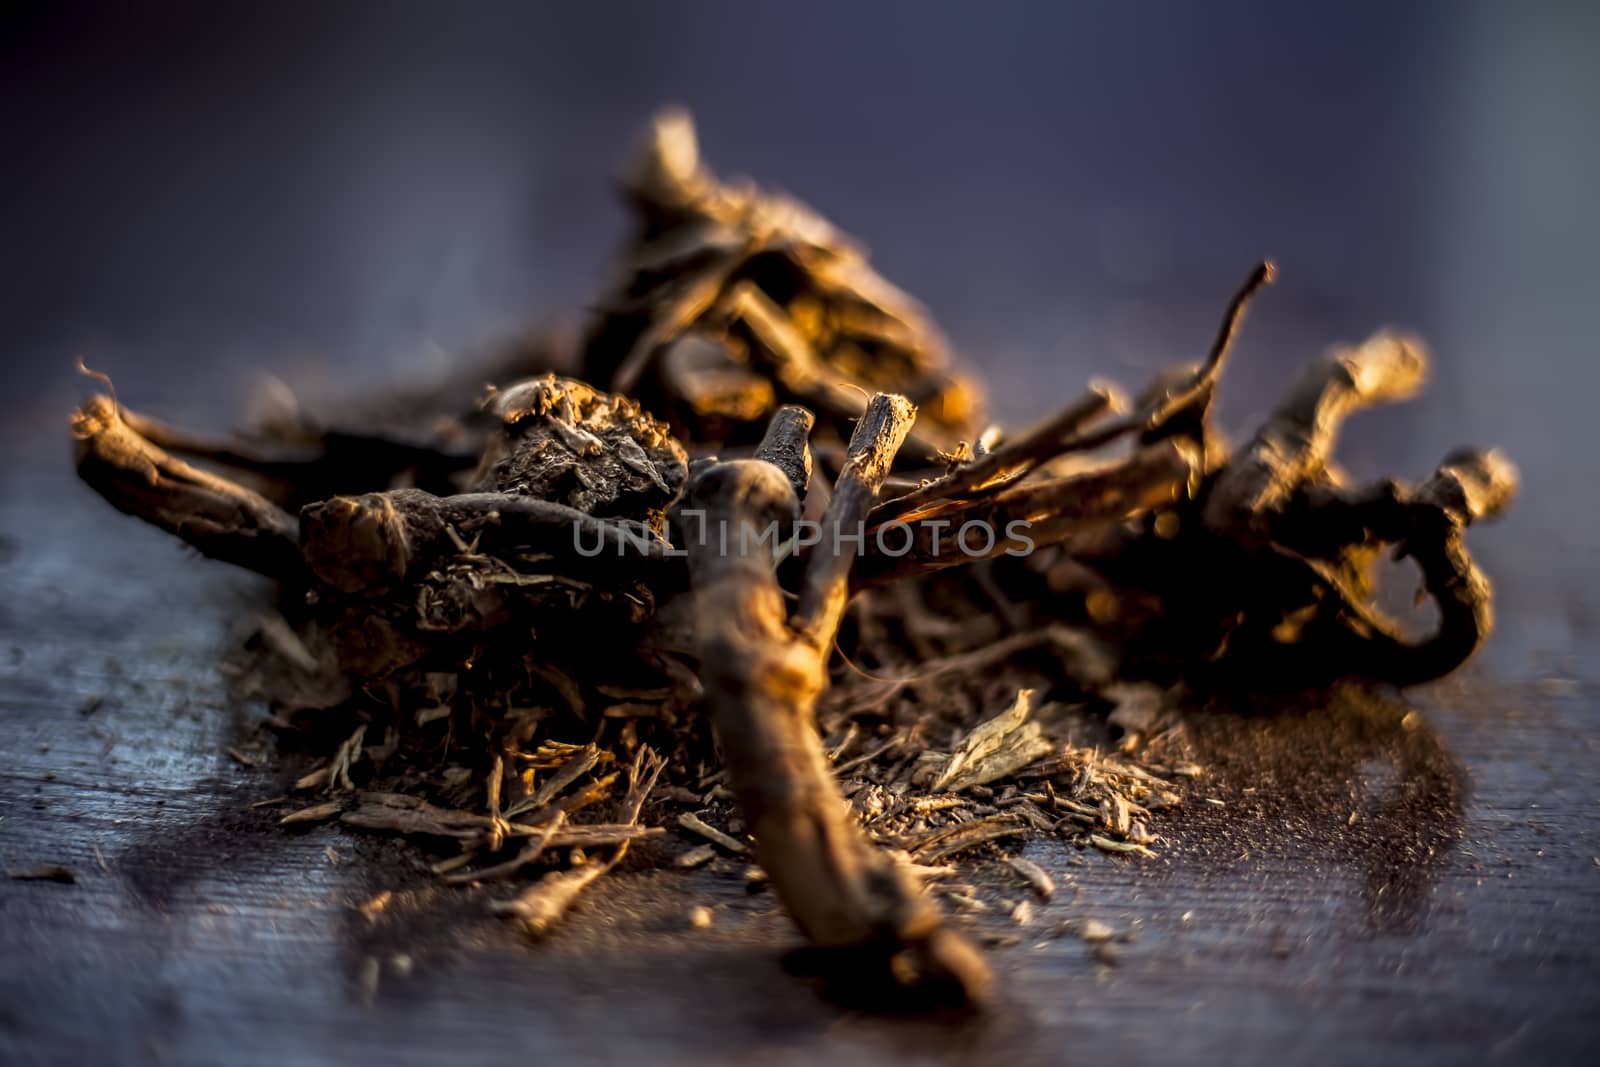 Close up of raw ayurvedic herb i.e., chitrak/Plumbago zeylanica roots on the brown-colored shiny surface along with its powder. Horizontal shot.